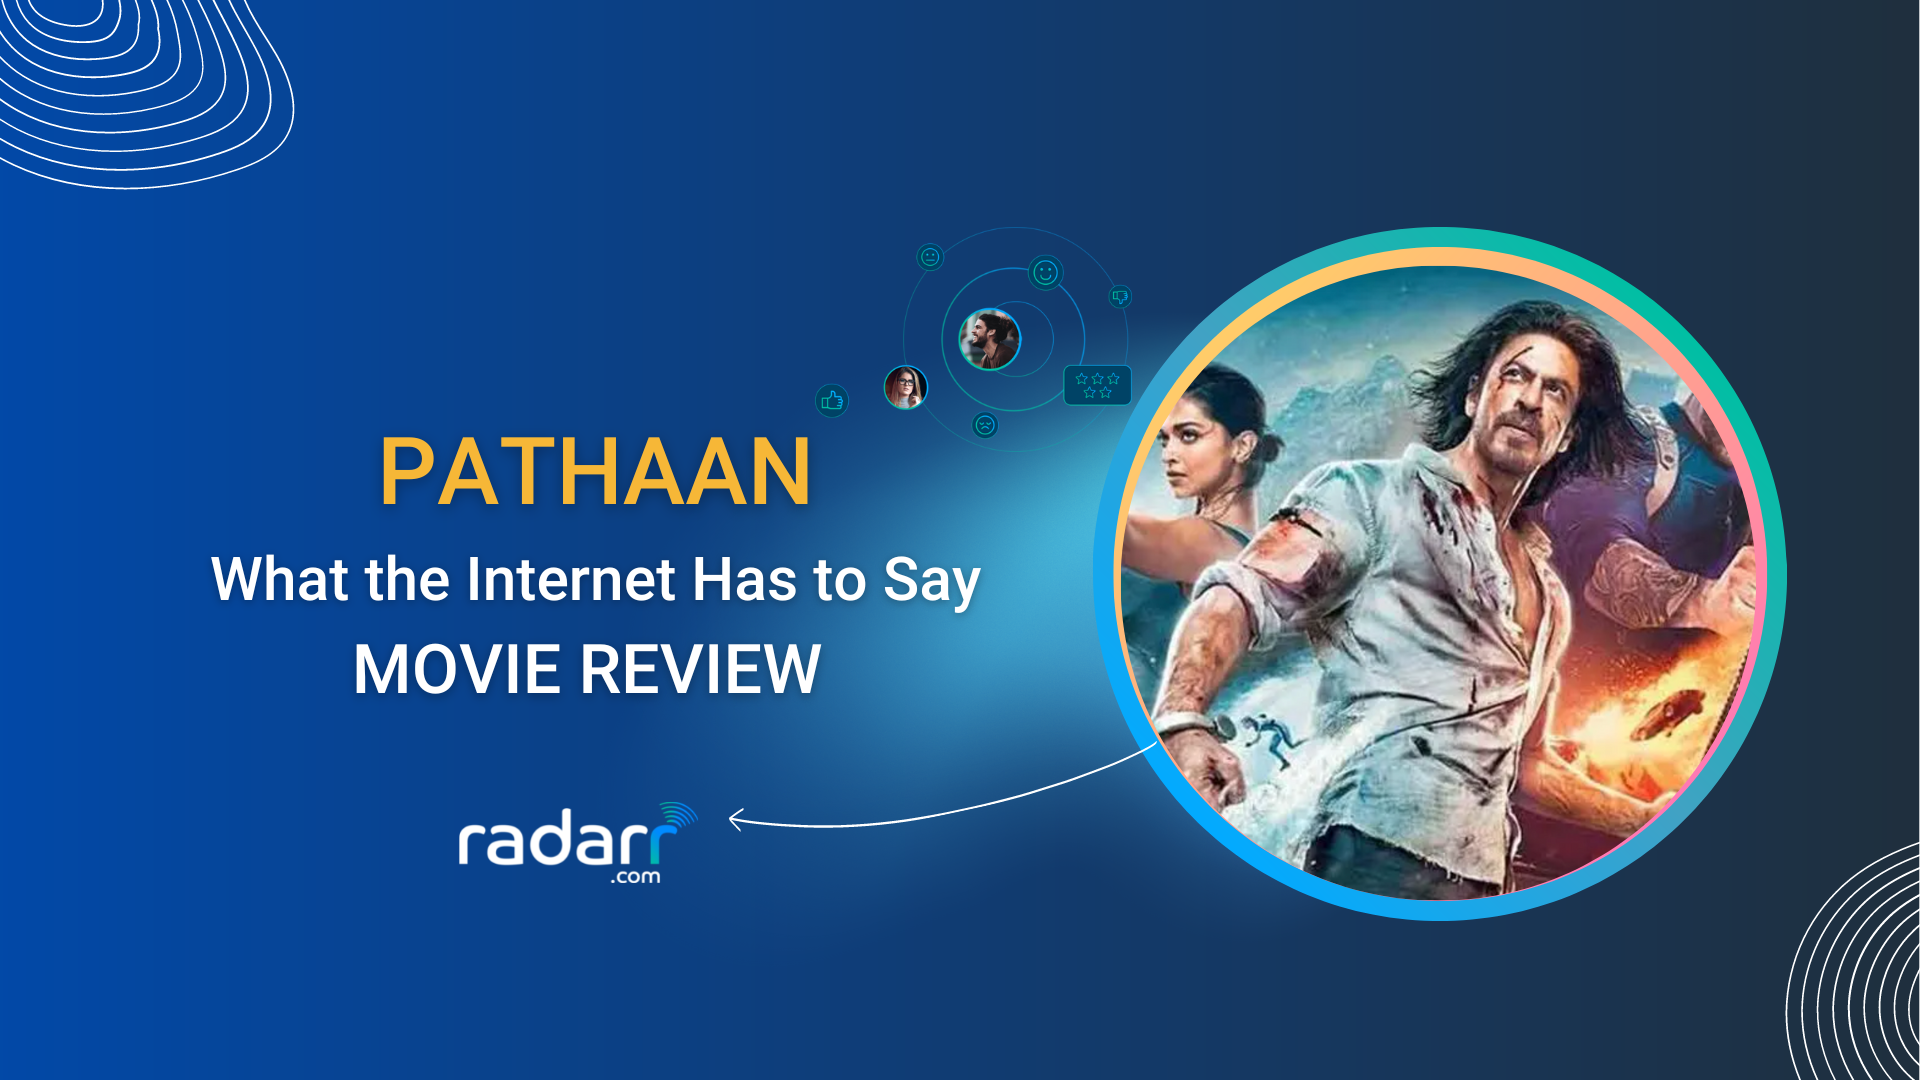 movie reviews by marketers - pathaan